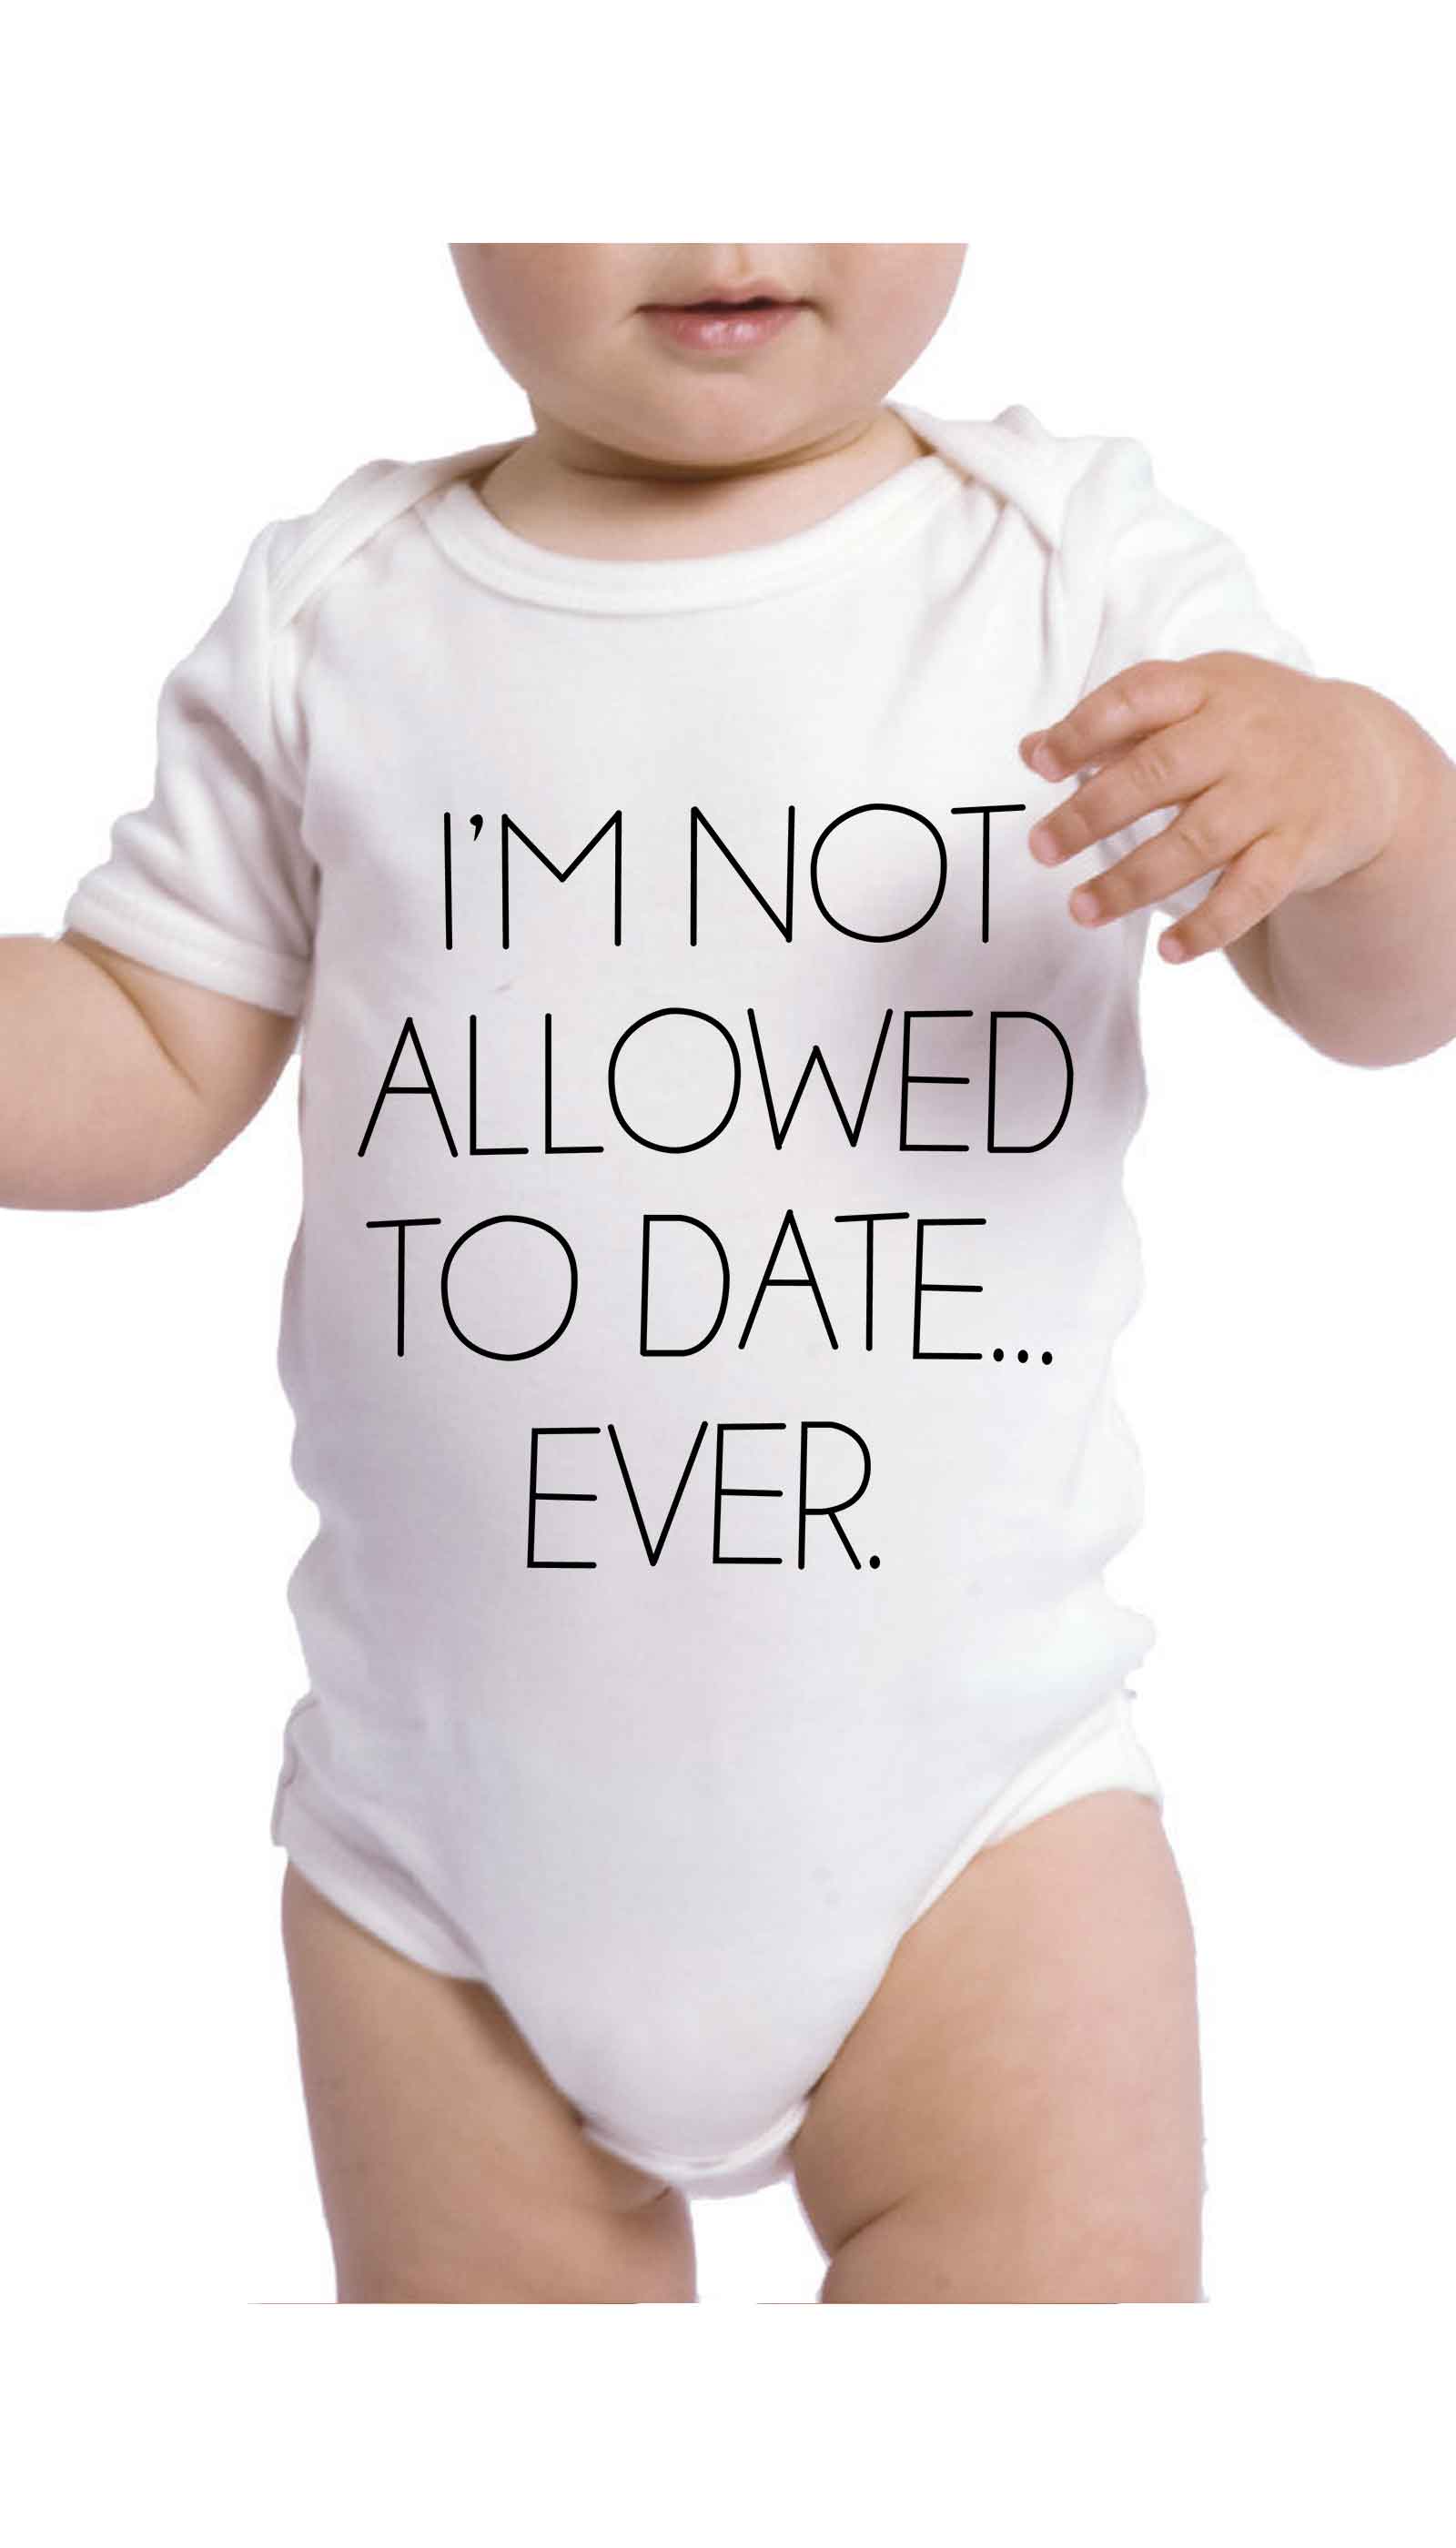 I'm Not Allowed To Date Ever Funny & Clever Baby Infant Onesie Gift | Sarcastic ME